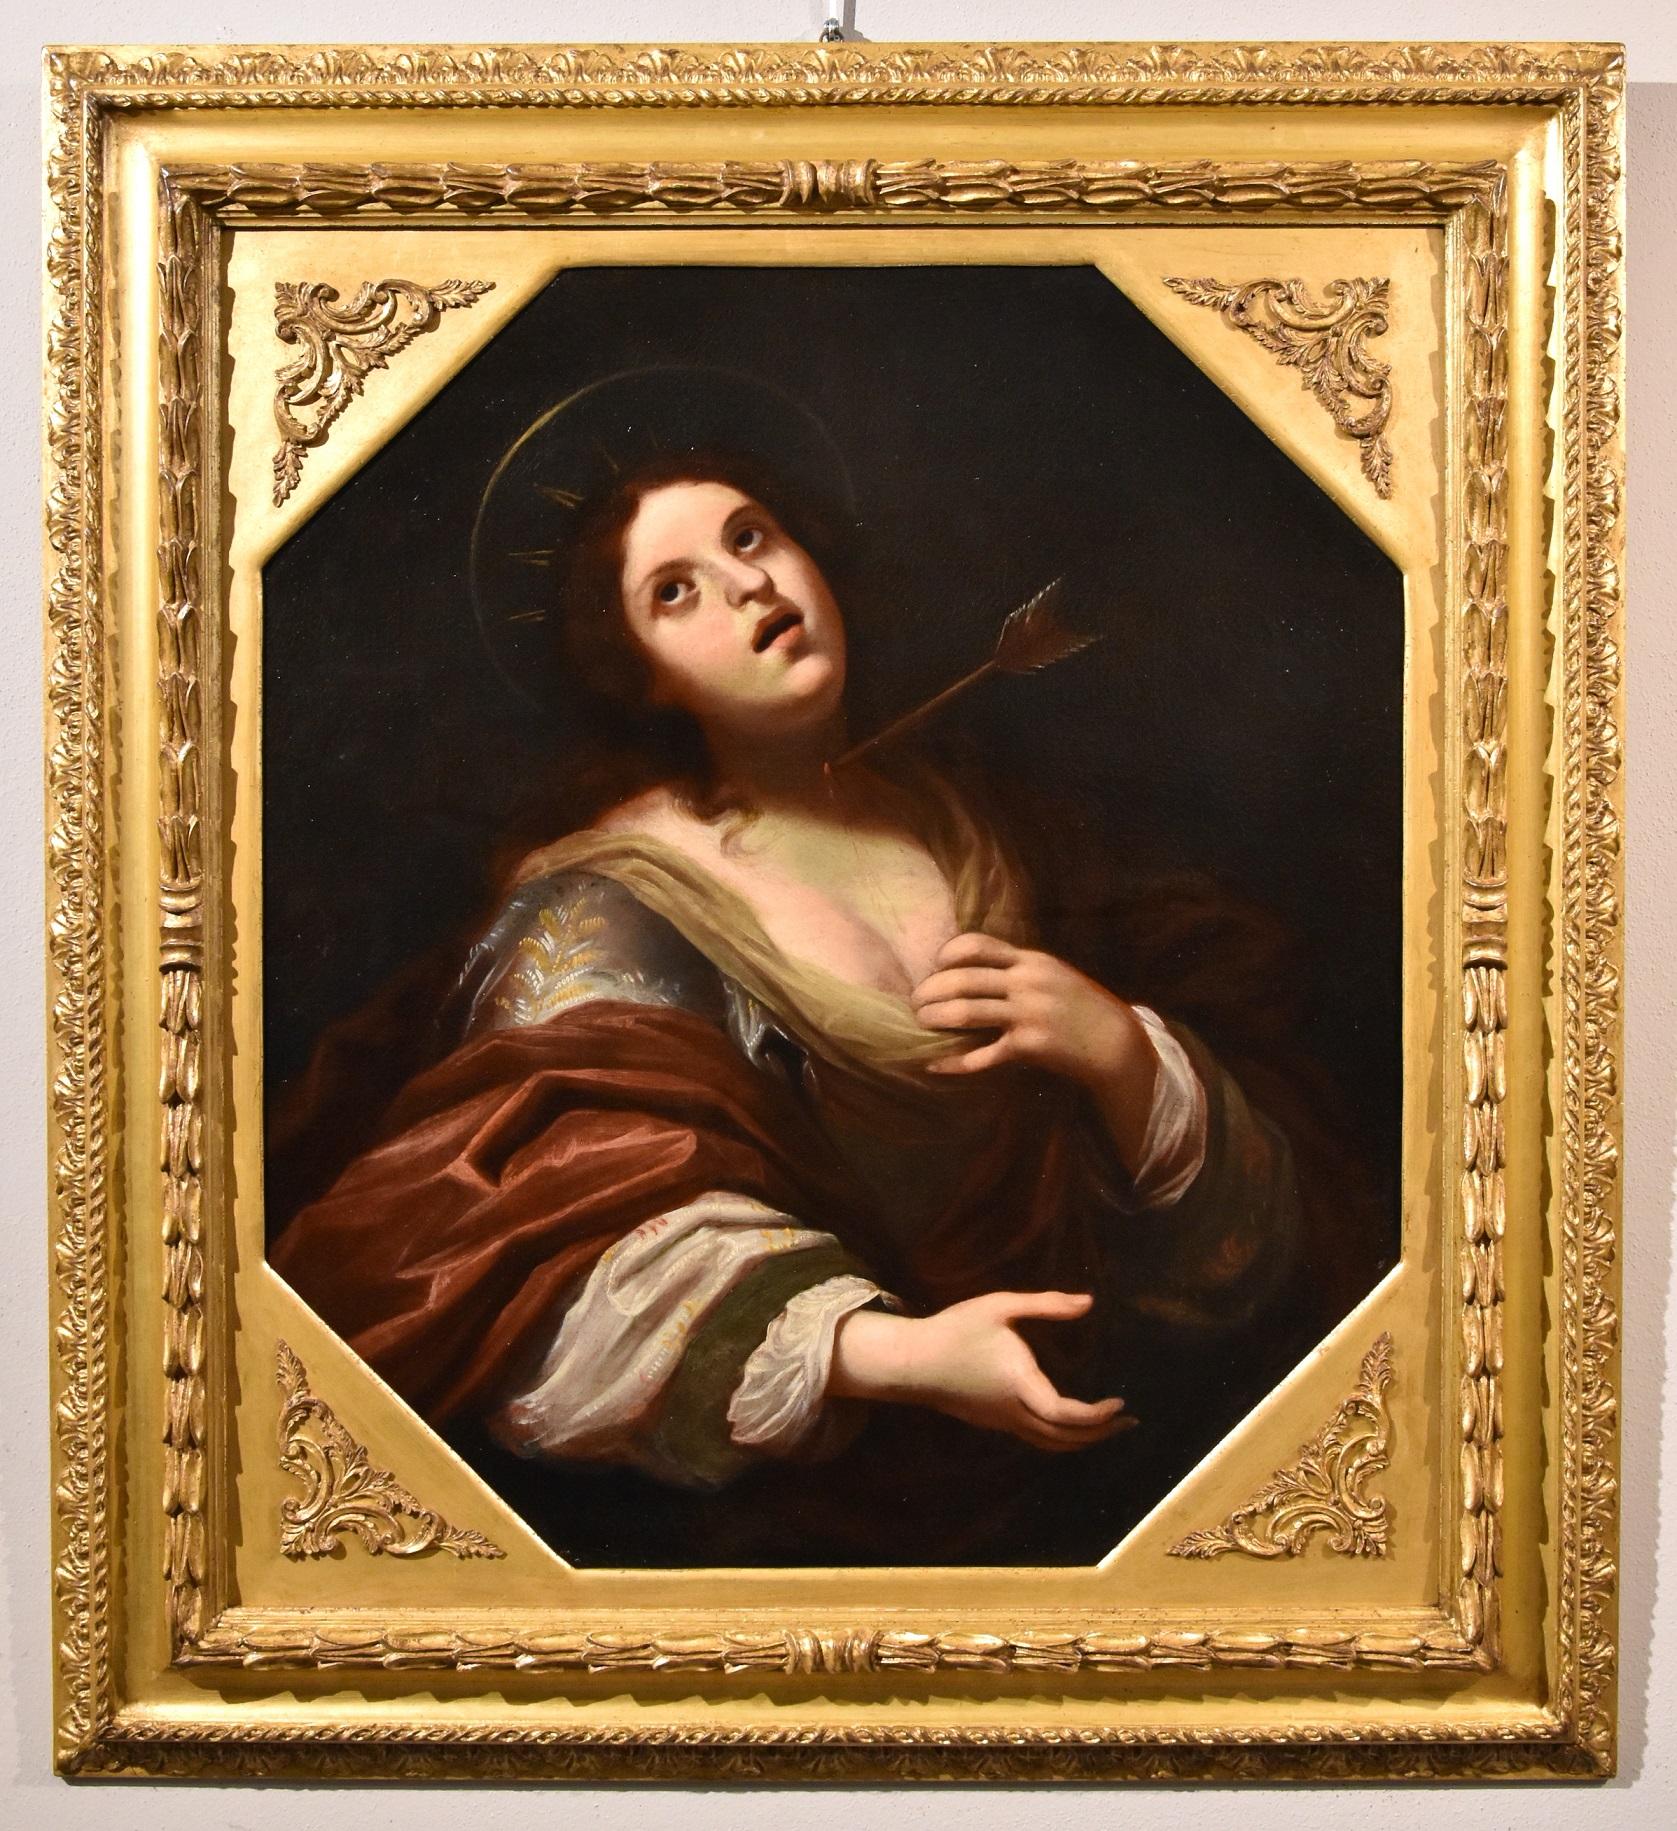 Ficherelli Saint Ursula Paint Oil on canvas Old master Italy 17th Century Art - Painting by Felice Ficherelli known as 'il Riposo' (San Gimignano 1603 - Florence 1660) 